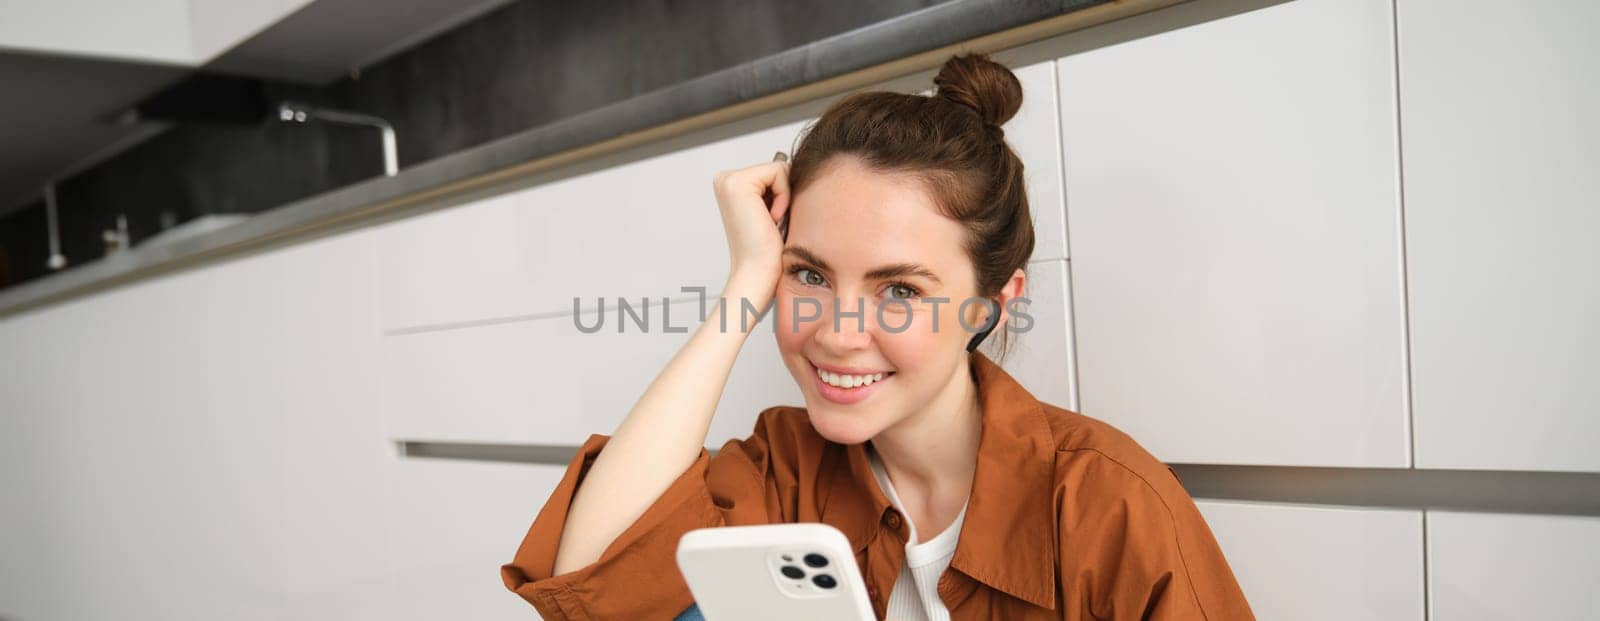 Portrait of beautiful smiling woman sitting on kitchen floor, scrolling social media on mobile phone, listening music in wireless headphones.